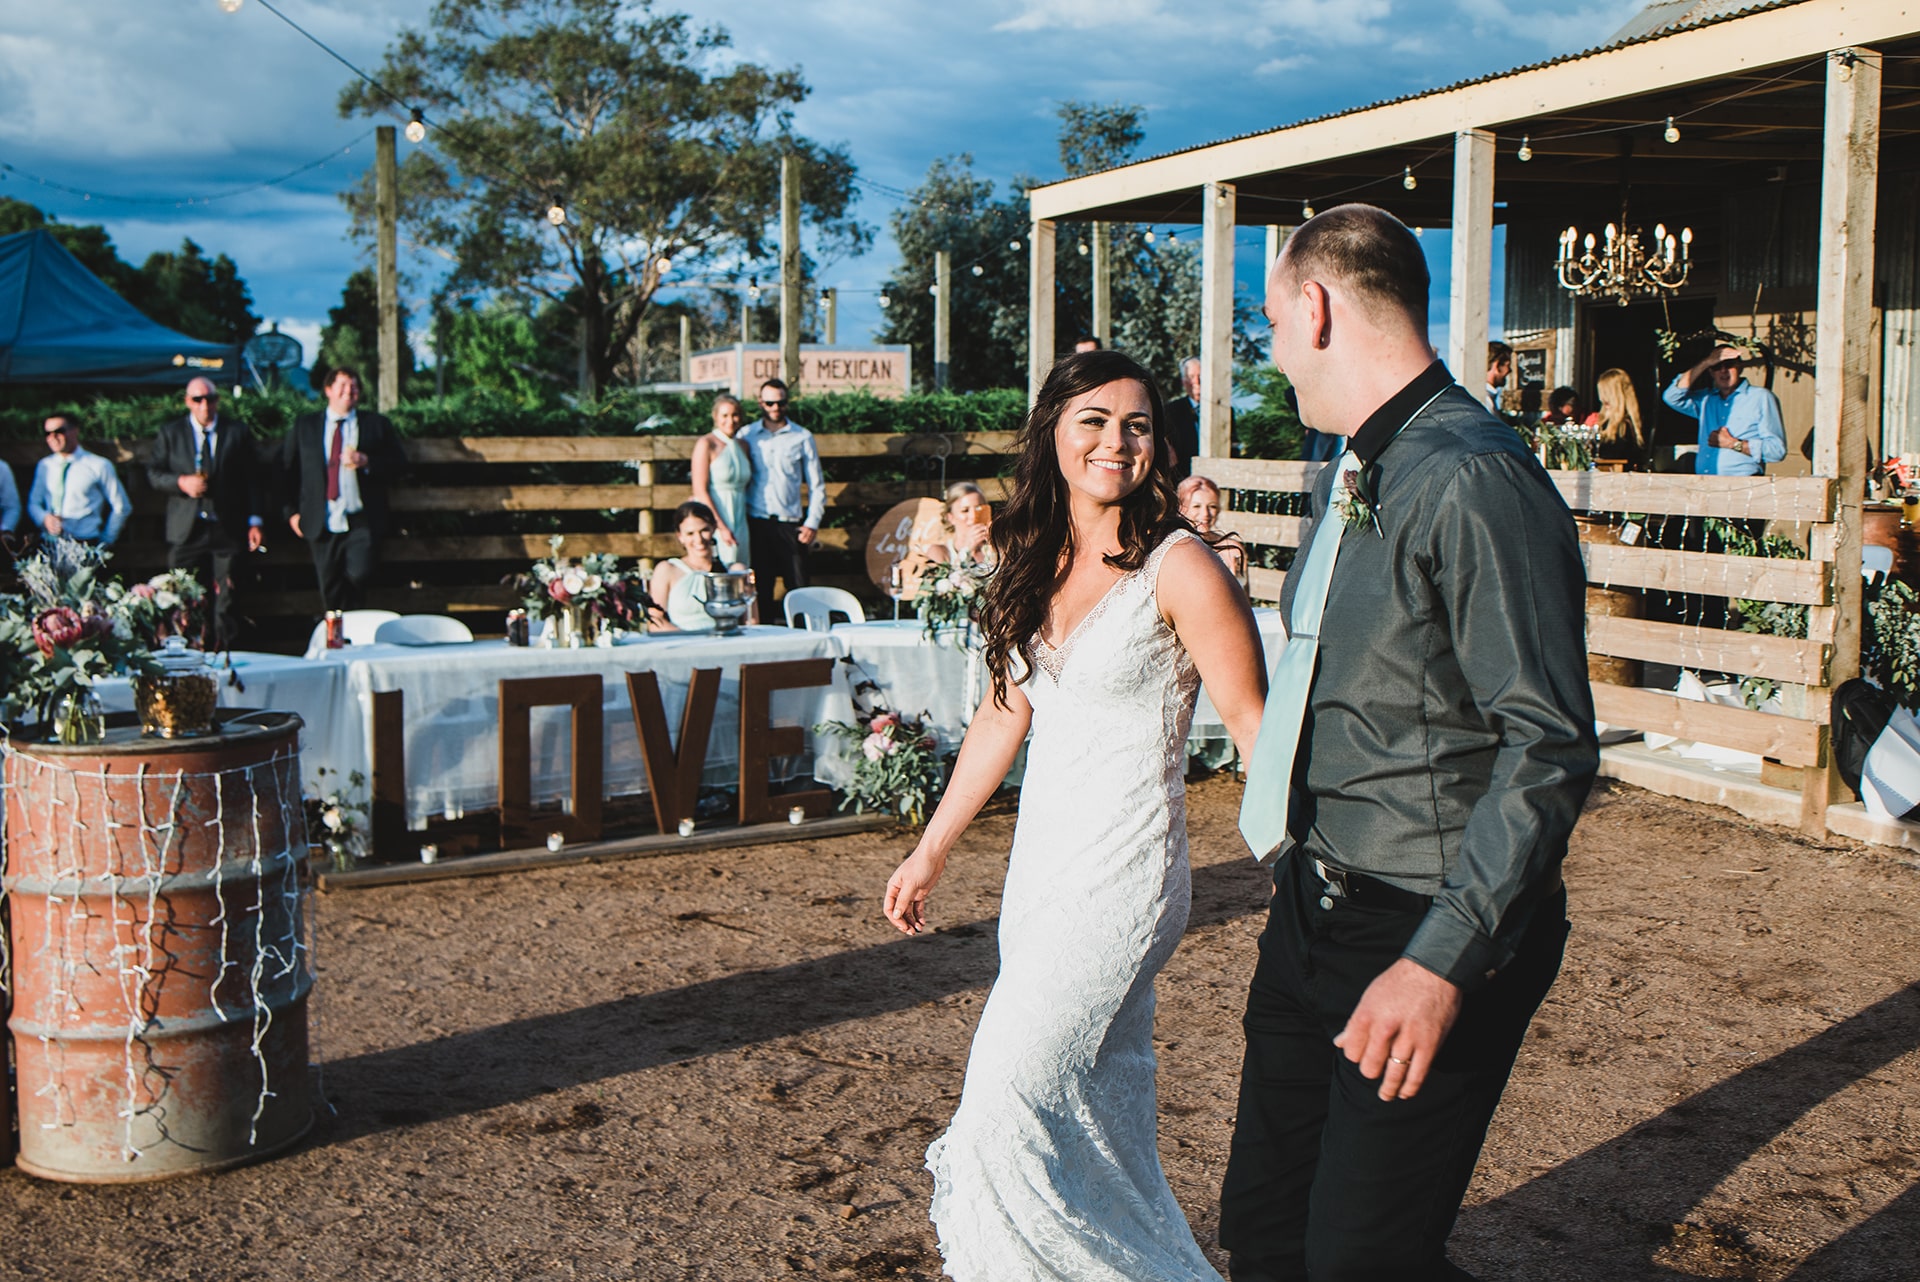 Bride and groom entering the wedding reception held at Quirindi Stables.